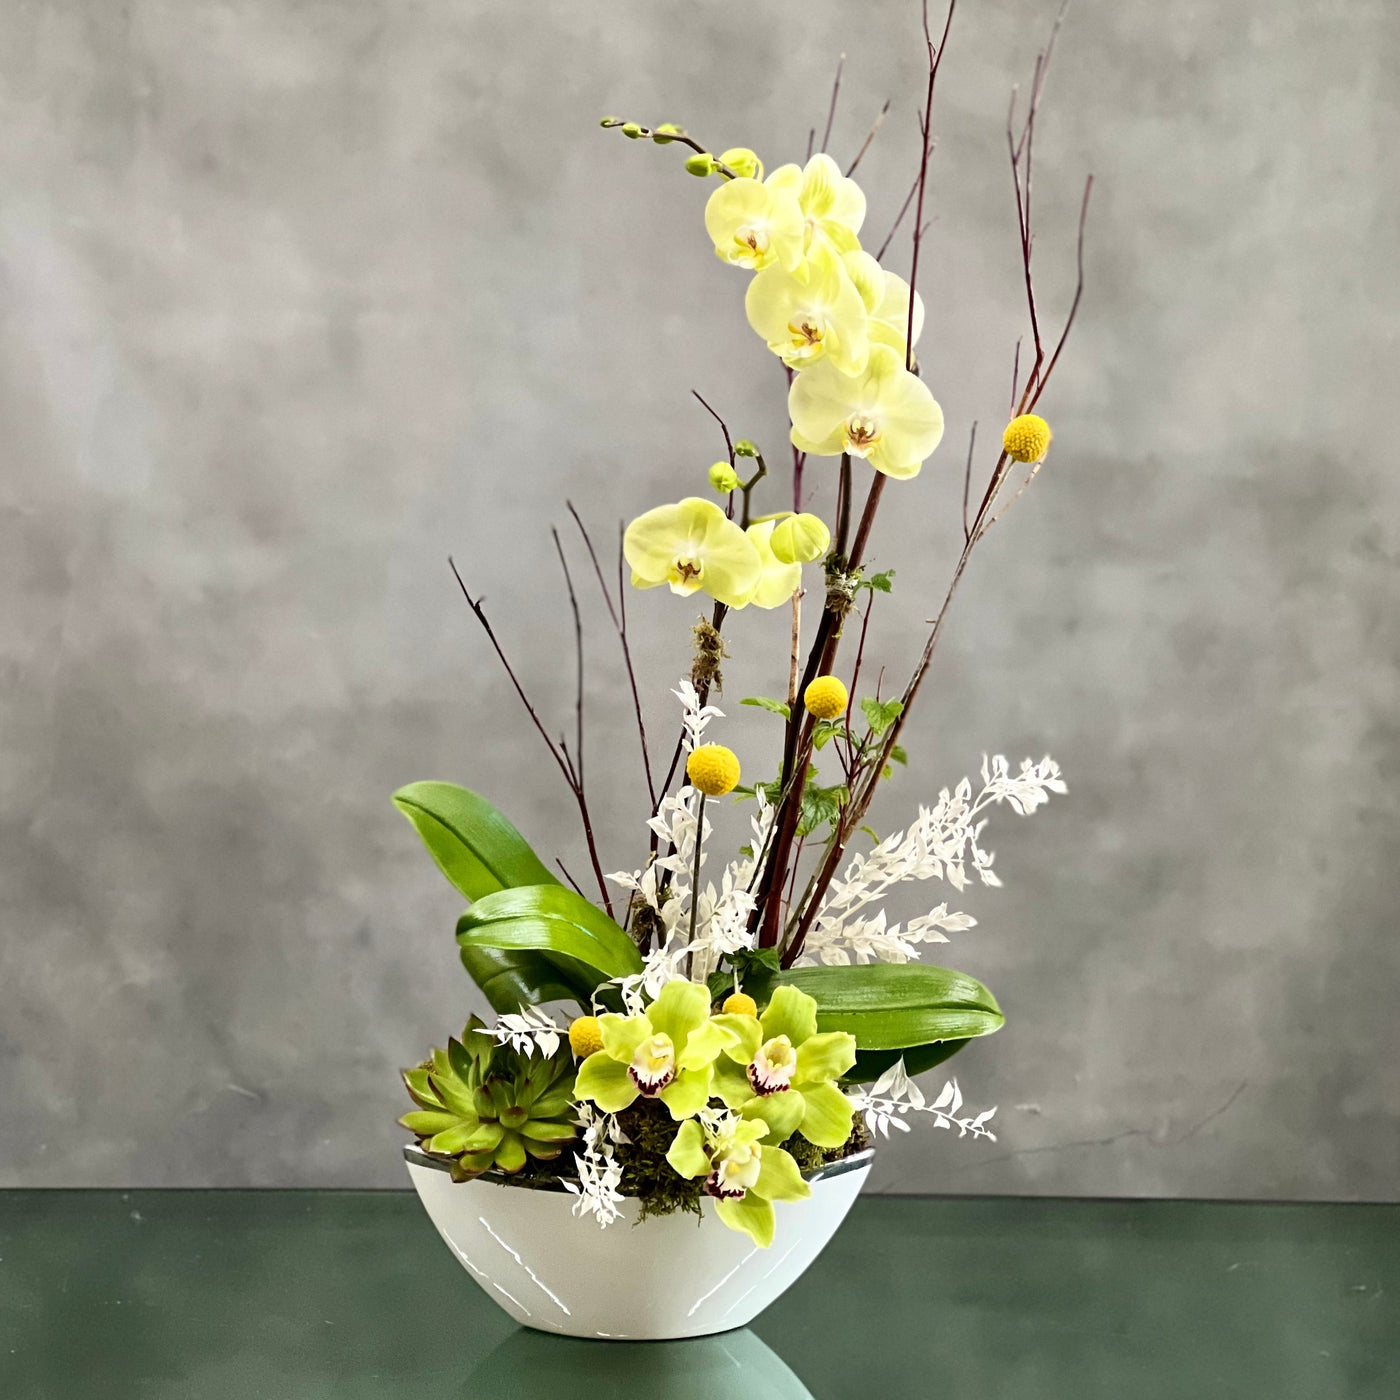 Lovely, graceful, and exotic Beverly Hills Florists presents same day delivery for Lemonade Orchids. Our Orchids with long, delicate stems that reach up to their striking wing-shaped blooms, these stunning beauties will add warmth & radiance to any space. Beautifully potted for a Birthdays, Thank you, Get well and Congratulations. Potted inside a white modern ceramic pot along with succulents, this unique gift is one they’ll enjoy for a long time to come. Approx: 24" H